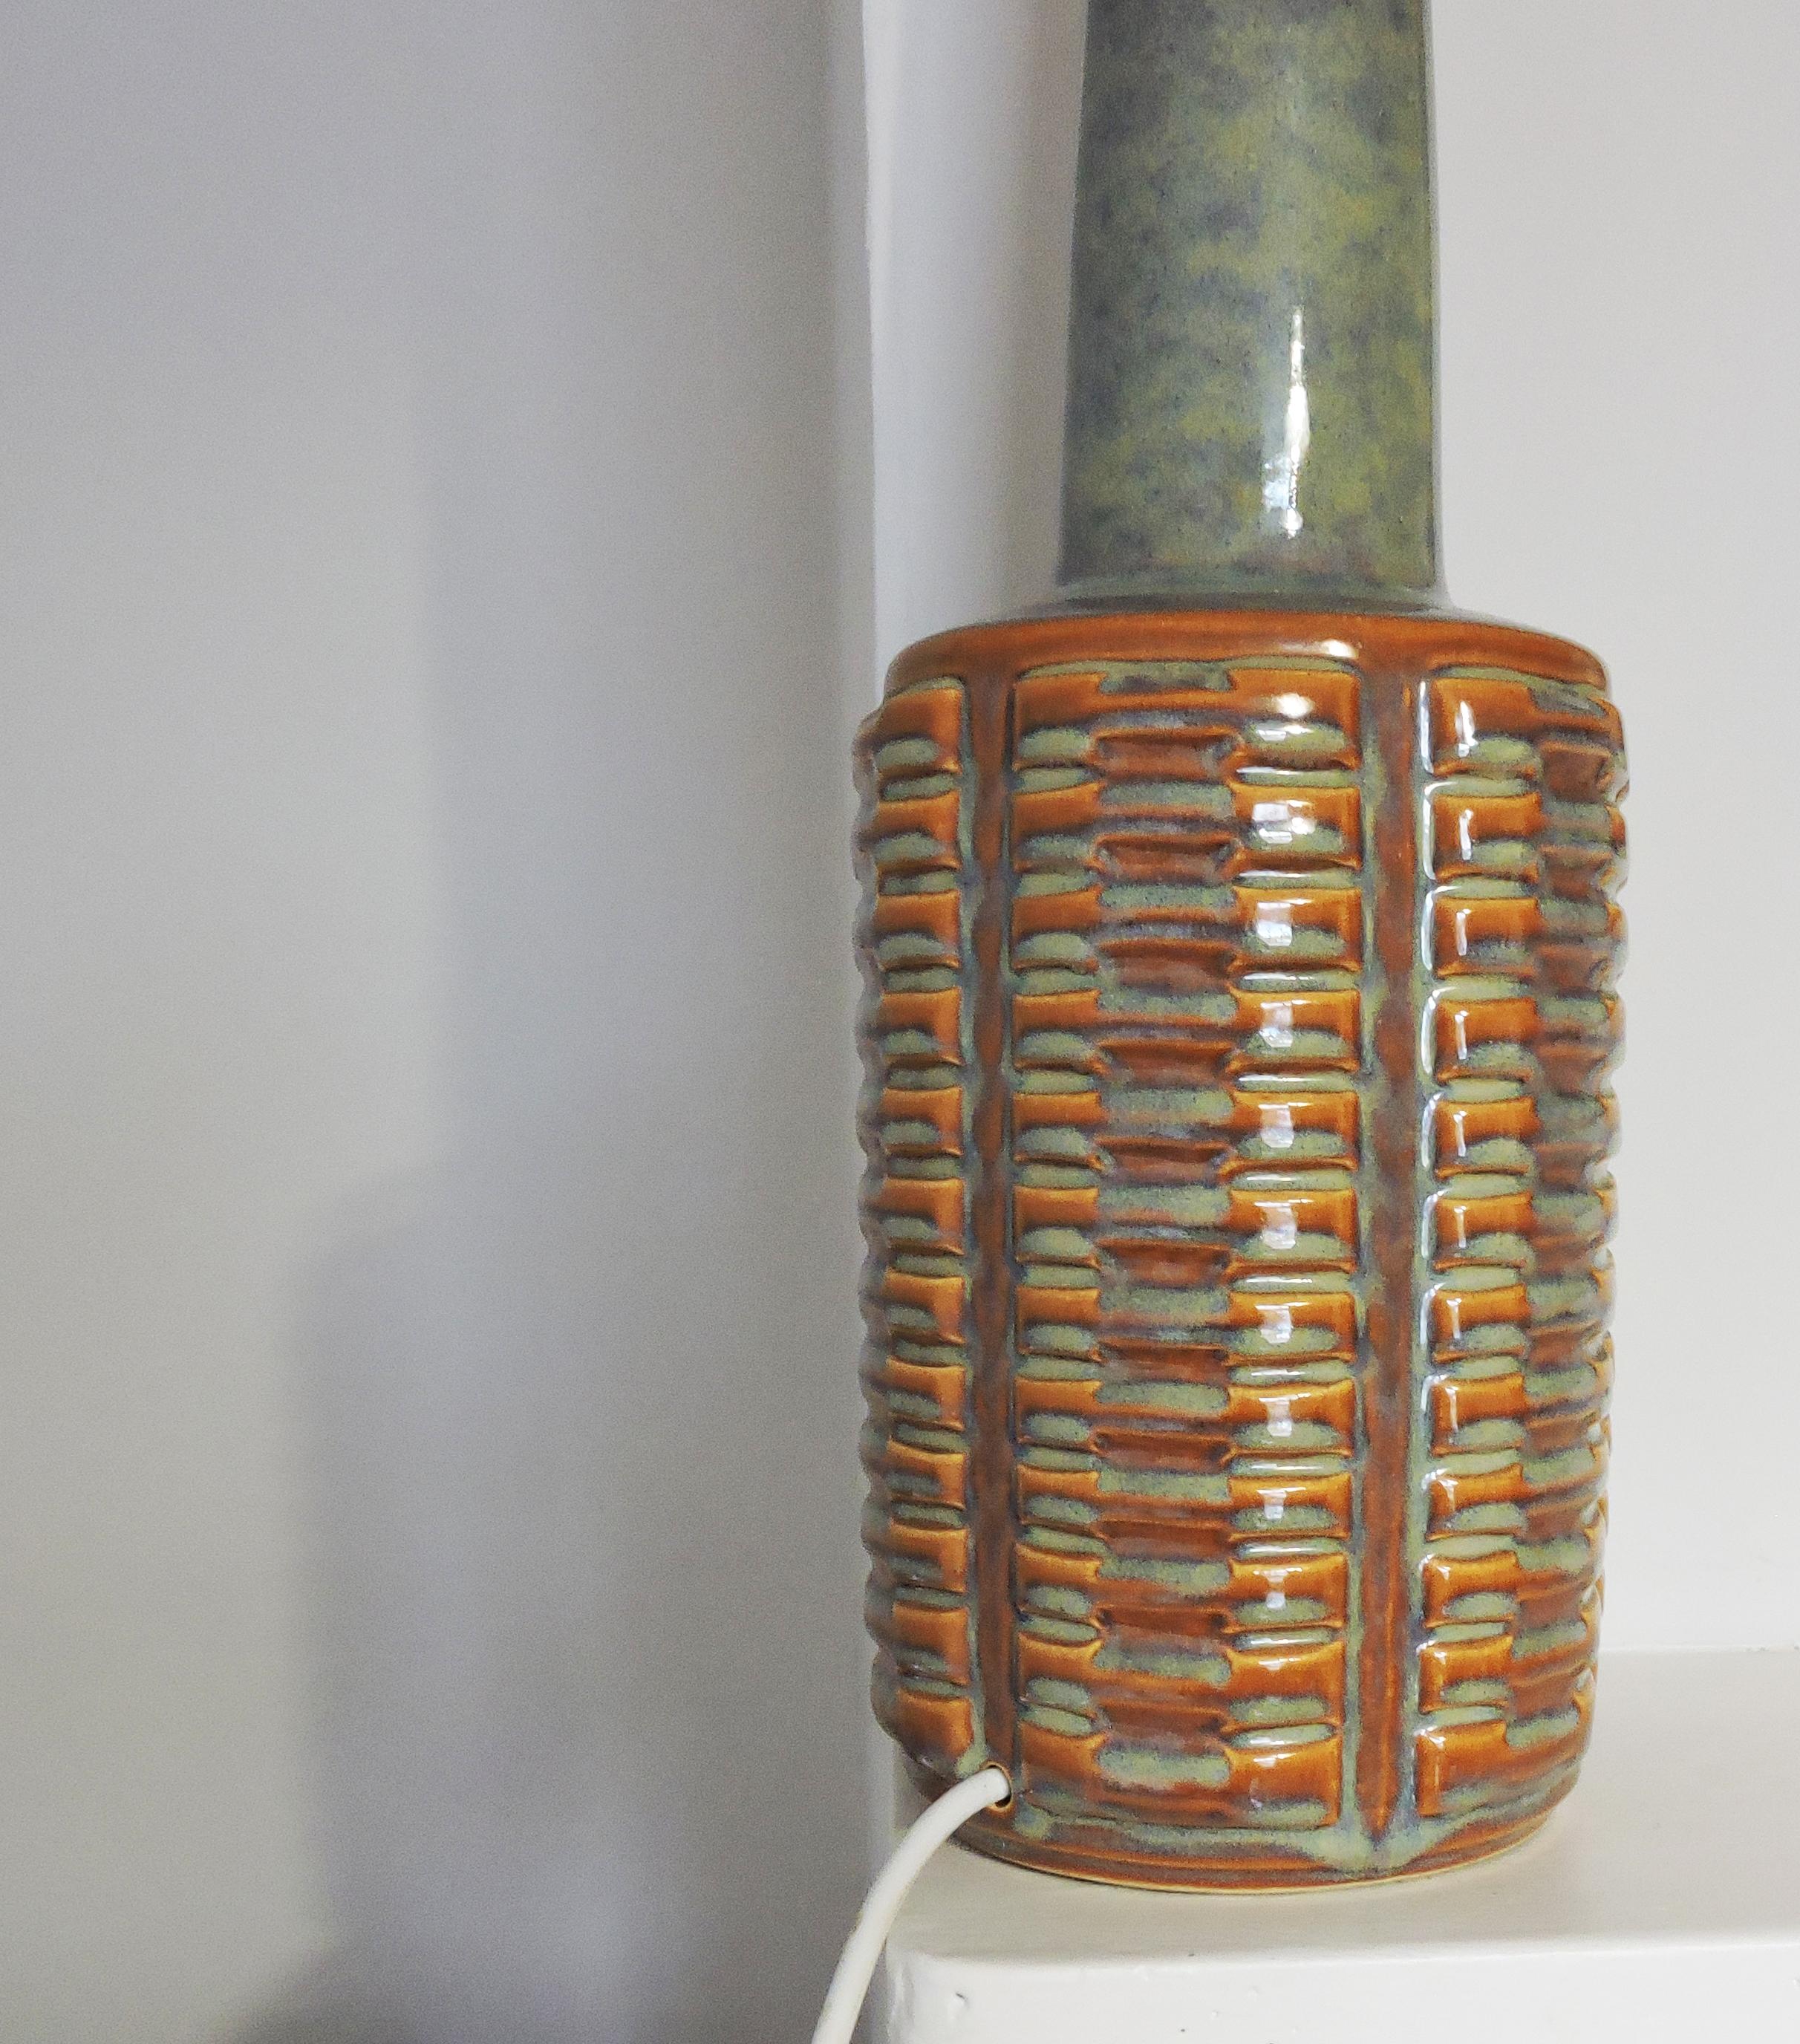 A 1023 table lamp by Einar Johansen for Søholm Stentøj produced in the 1950s.

A professional electrician has rewired this piece to be in working order.

Plug Type - UK Plug (up to 250V).
 